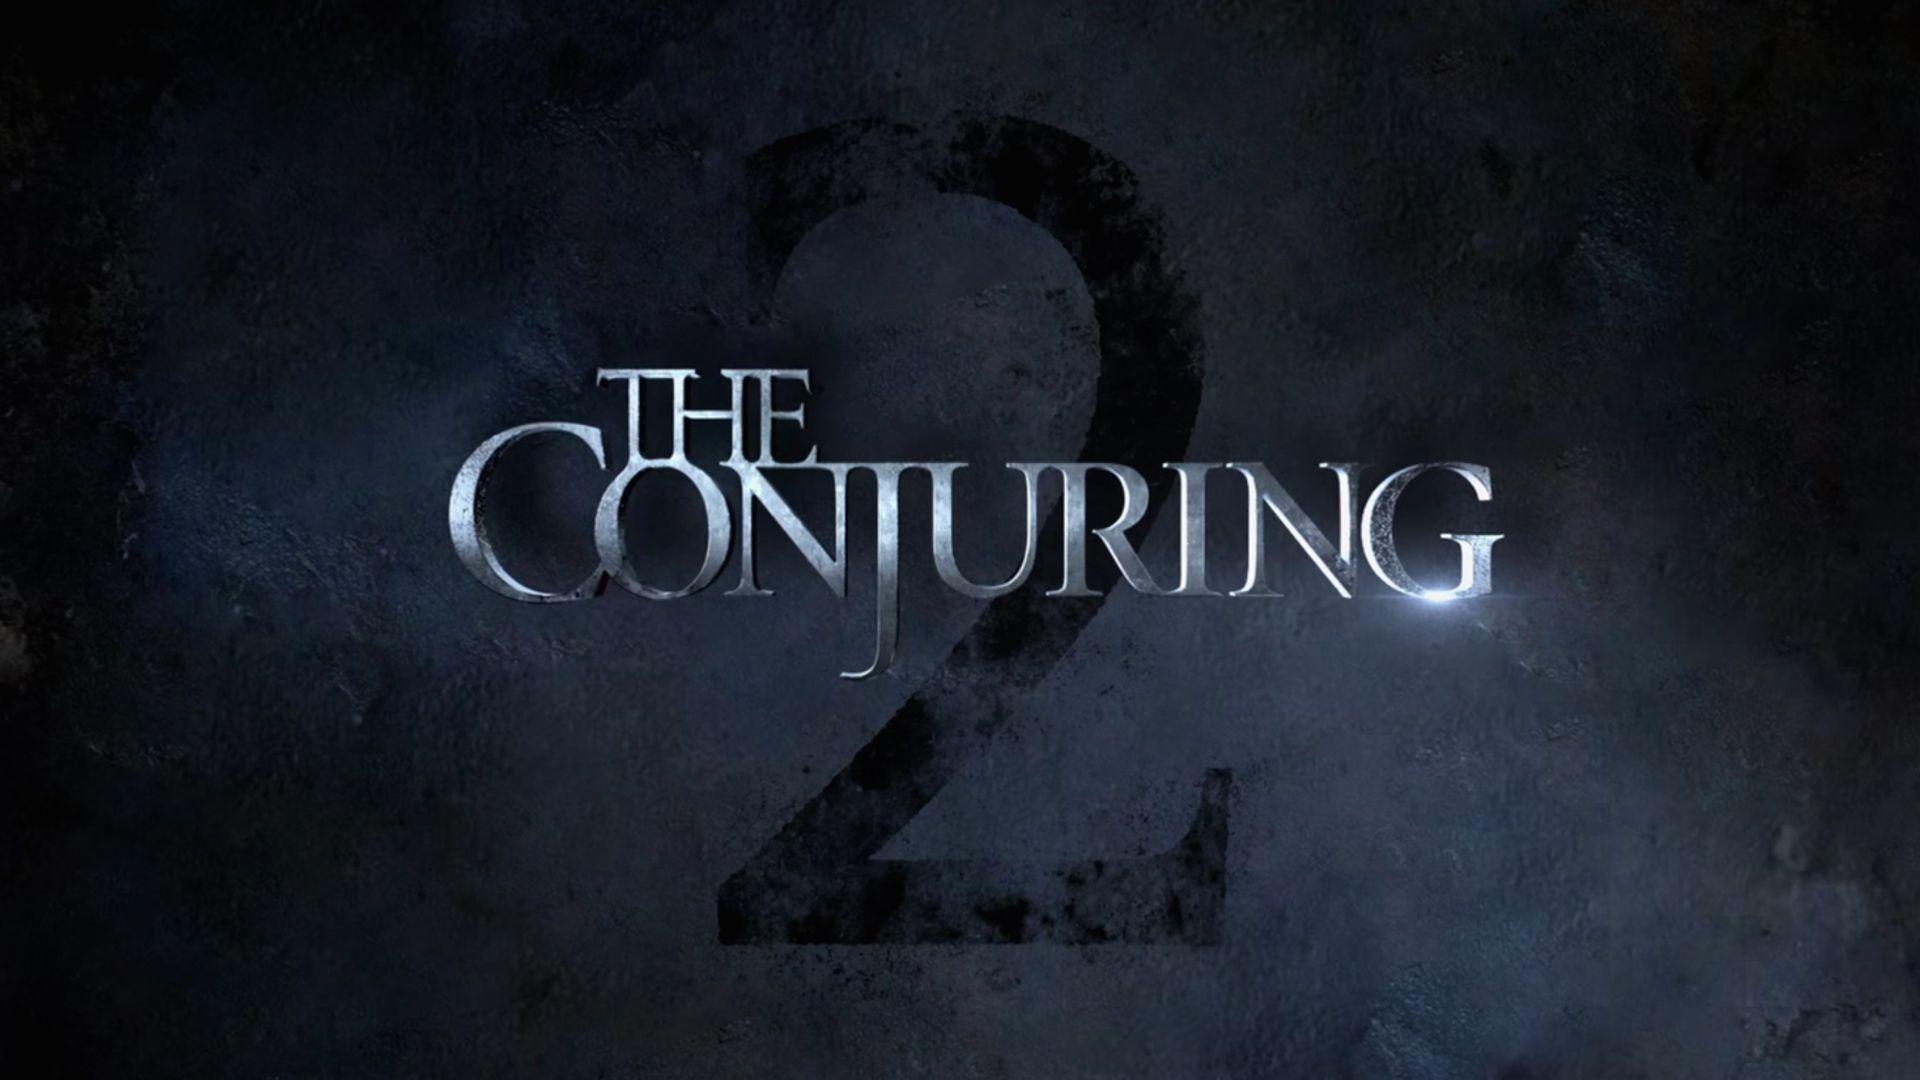 The Conjuring 2 Wallpaper Awesome Resolution #zga75w83